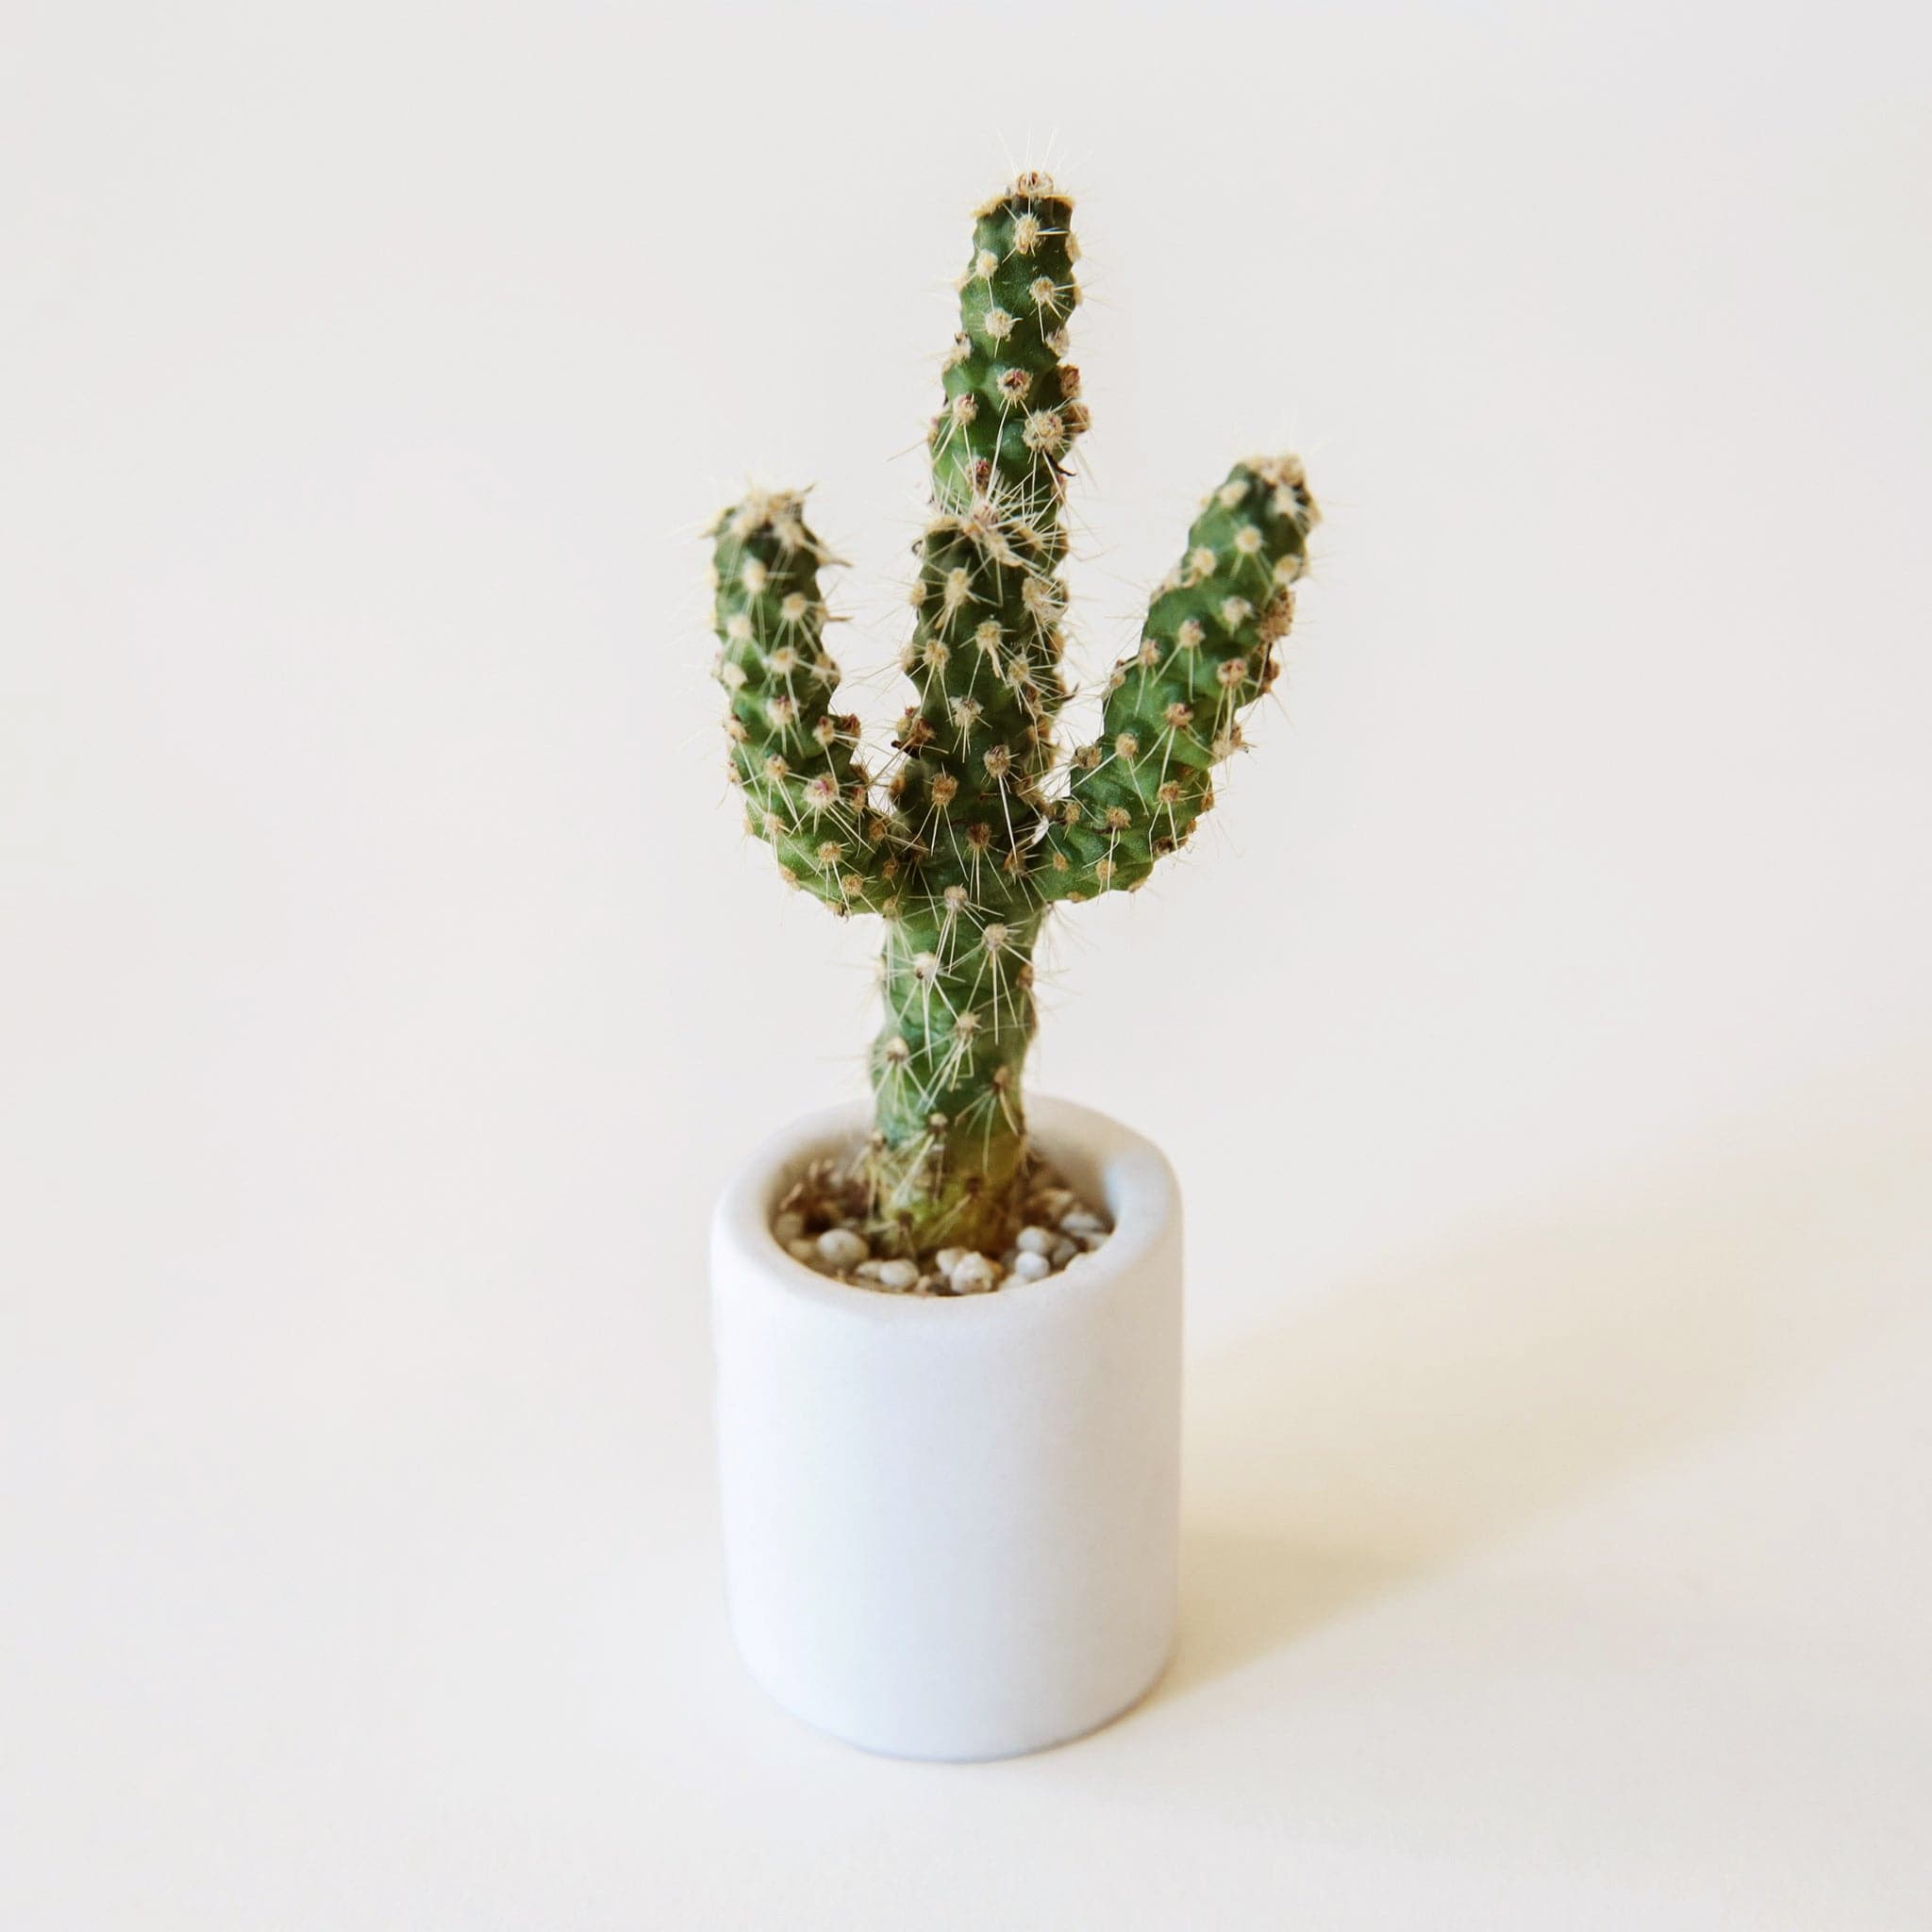 This white ceramic tiny pot is only an inch high, and has a smooth ceramic matte finish.